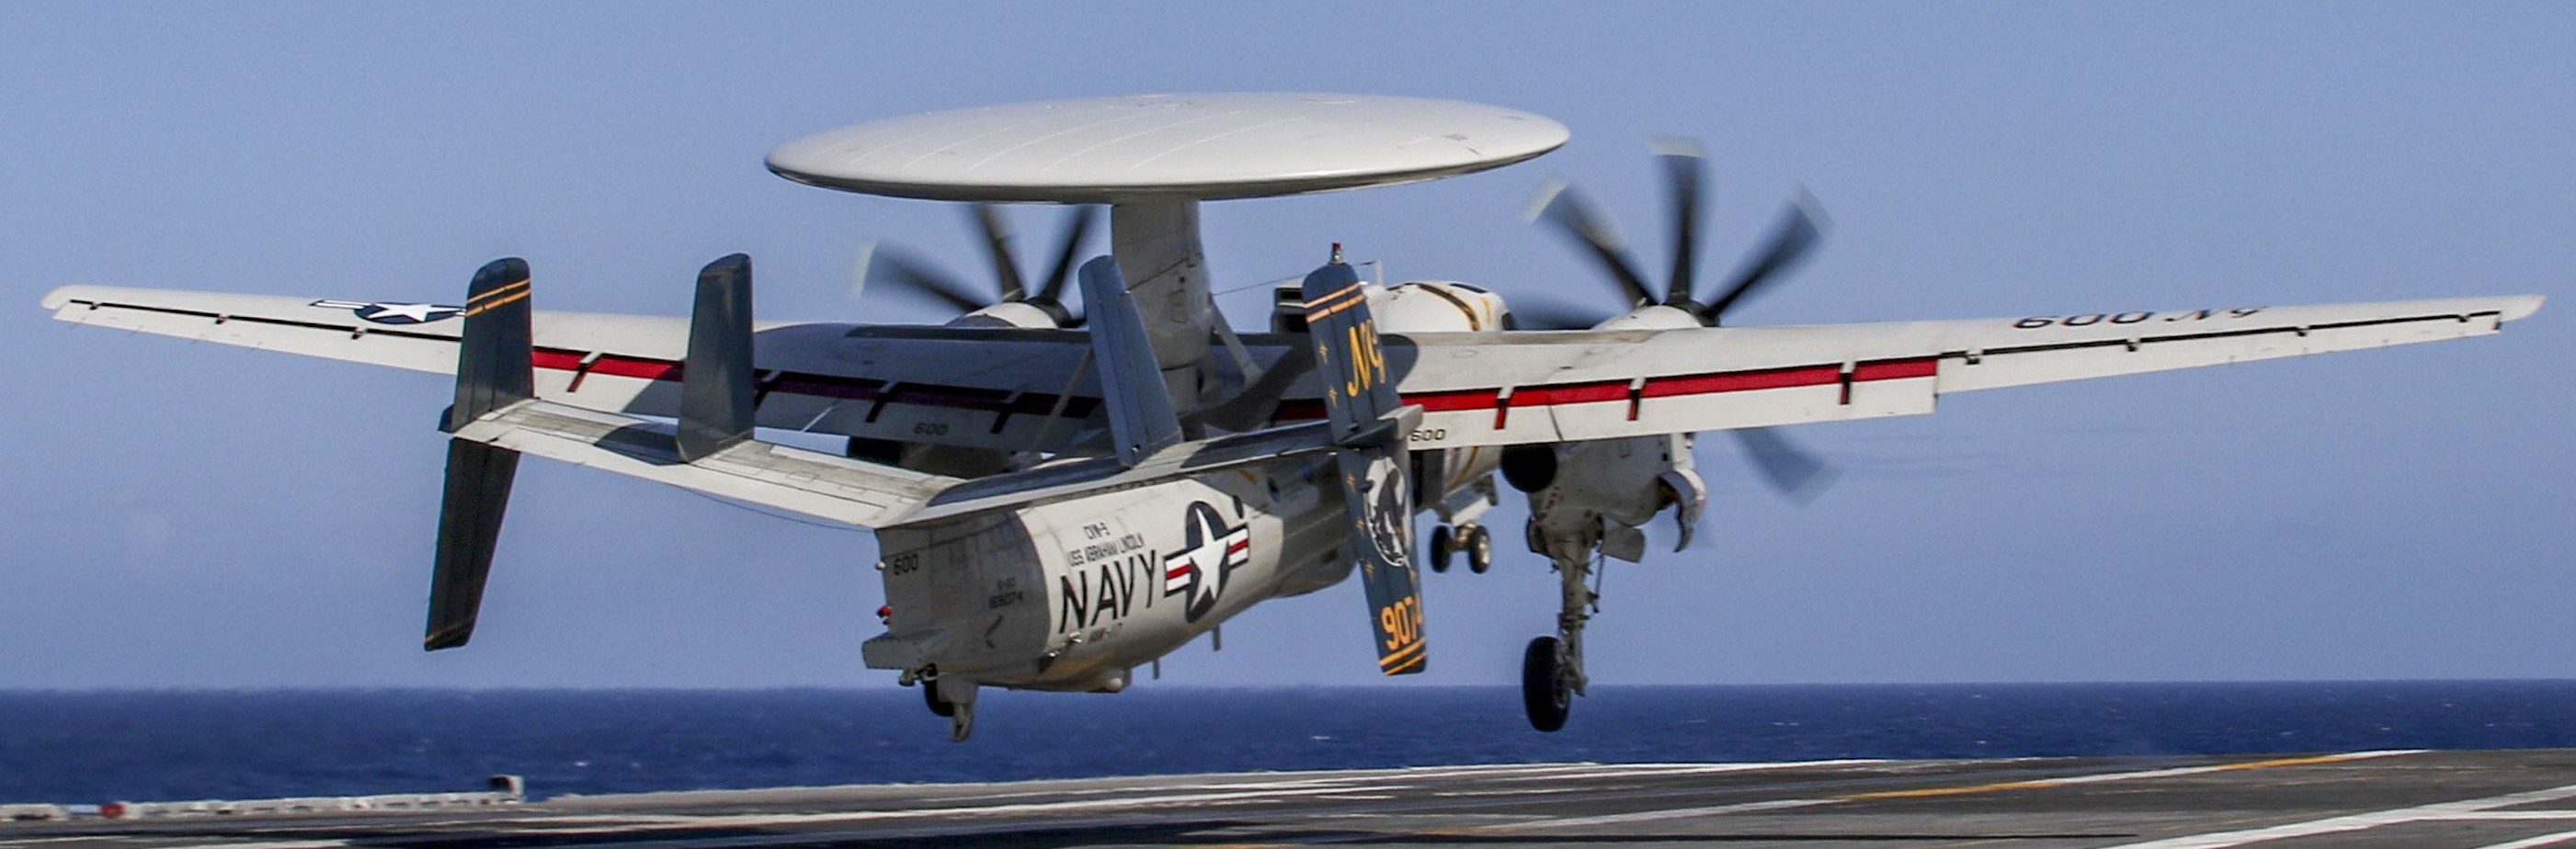 vaw-117 wallbangers airborne command and control squadron navy e-2d hawkeye cvw-9 uss abraham lincoln cvn-72 27